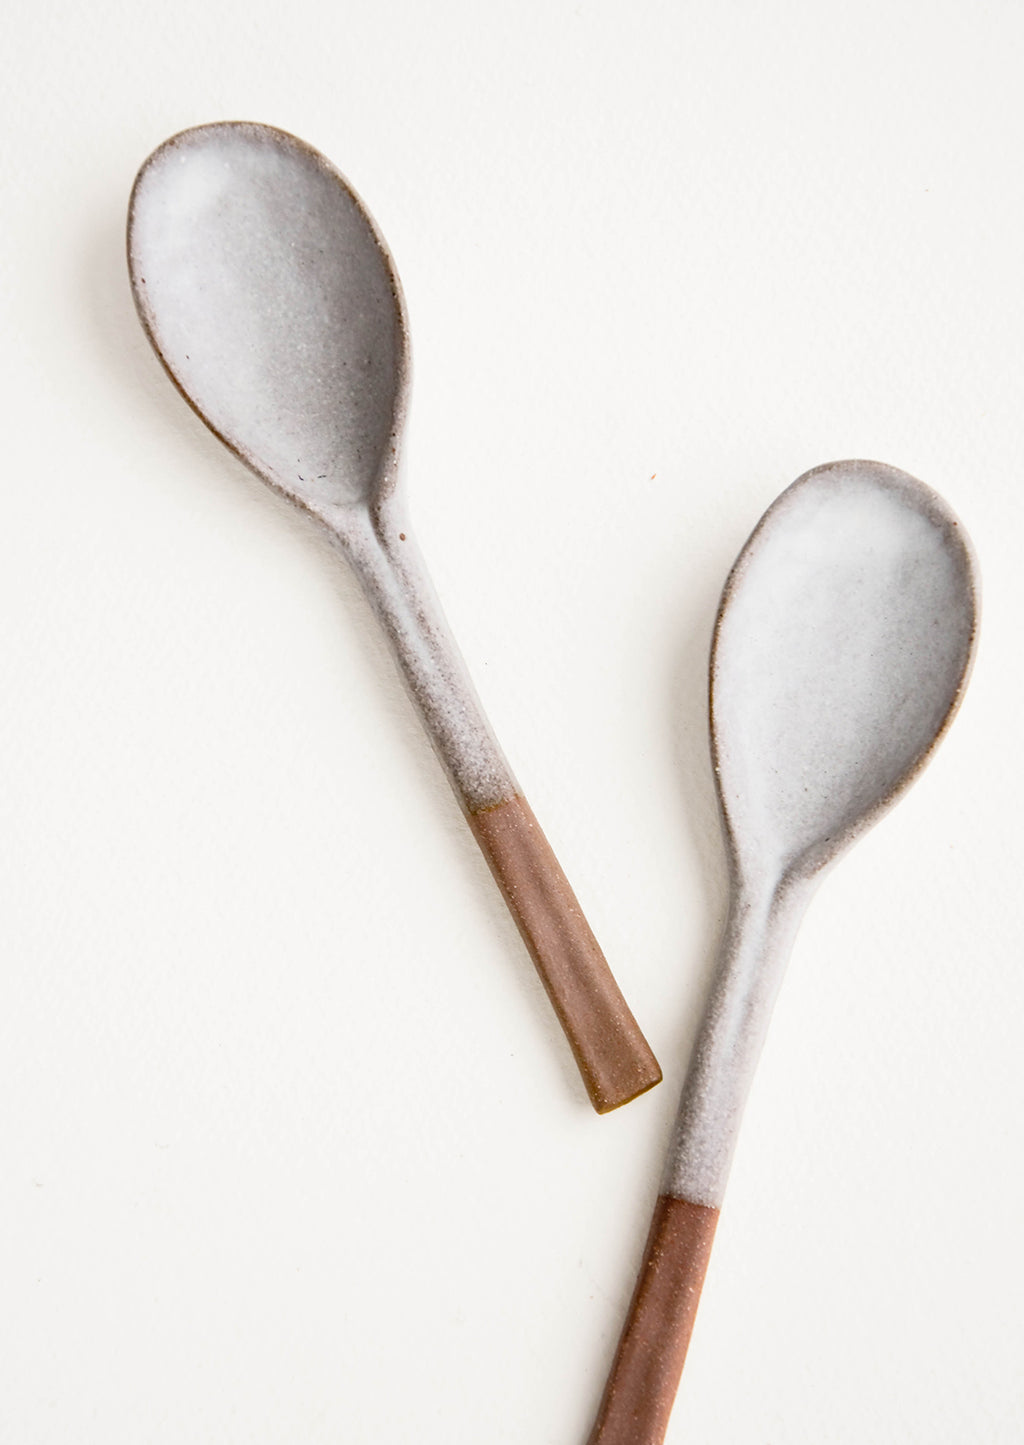 2: Ceramic soup spoons in earthy brown clay dipped in white glaze